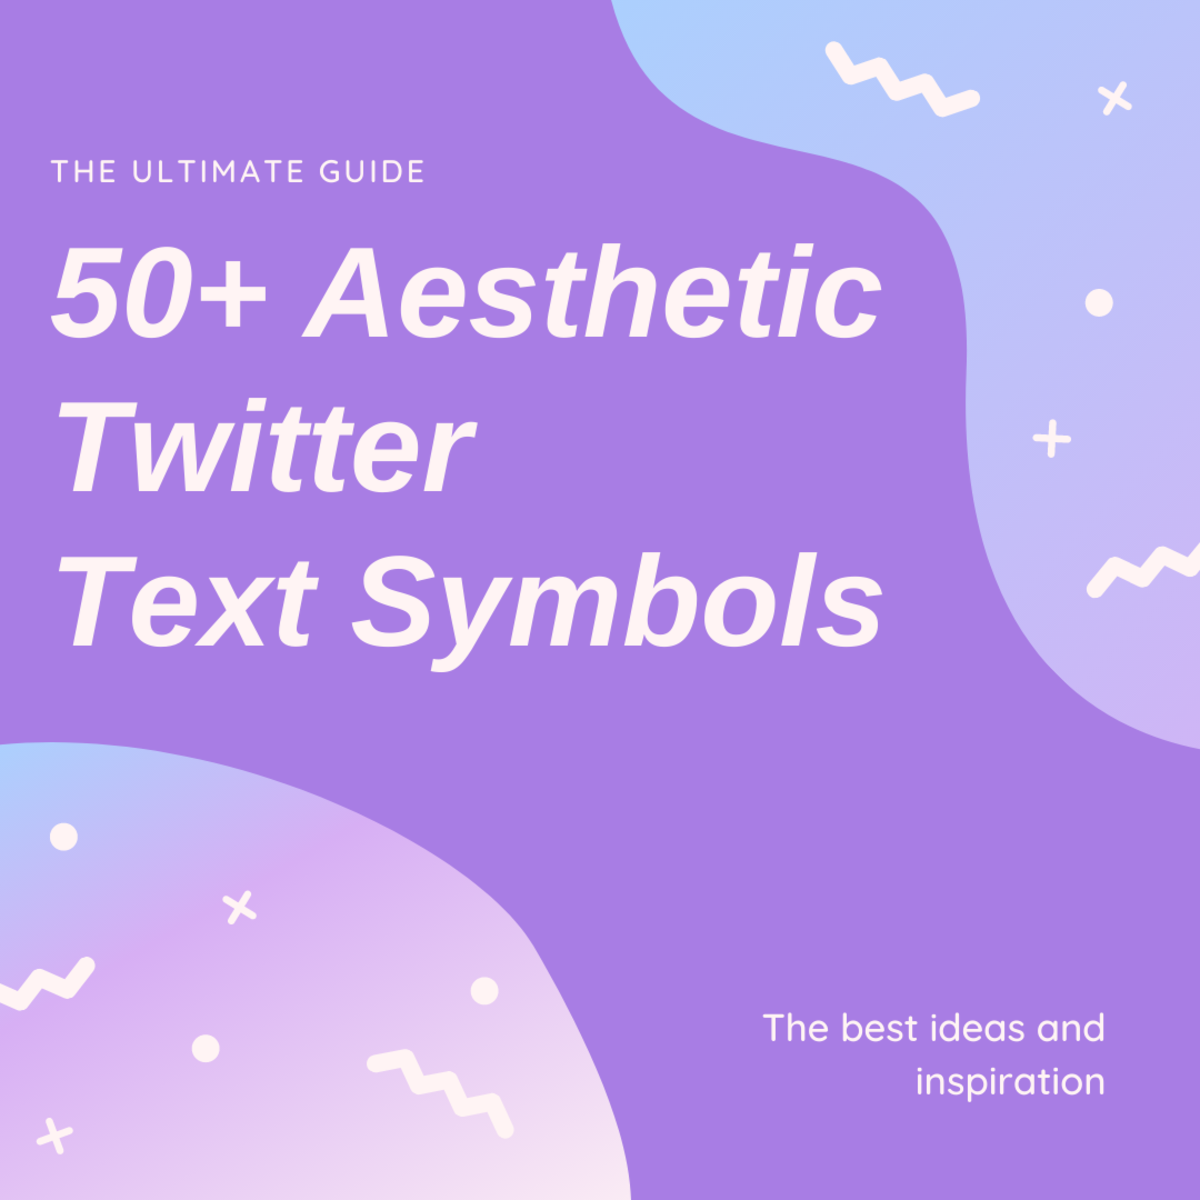 50+ Twitter Symbols to Try Out: The Ultimate List